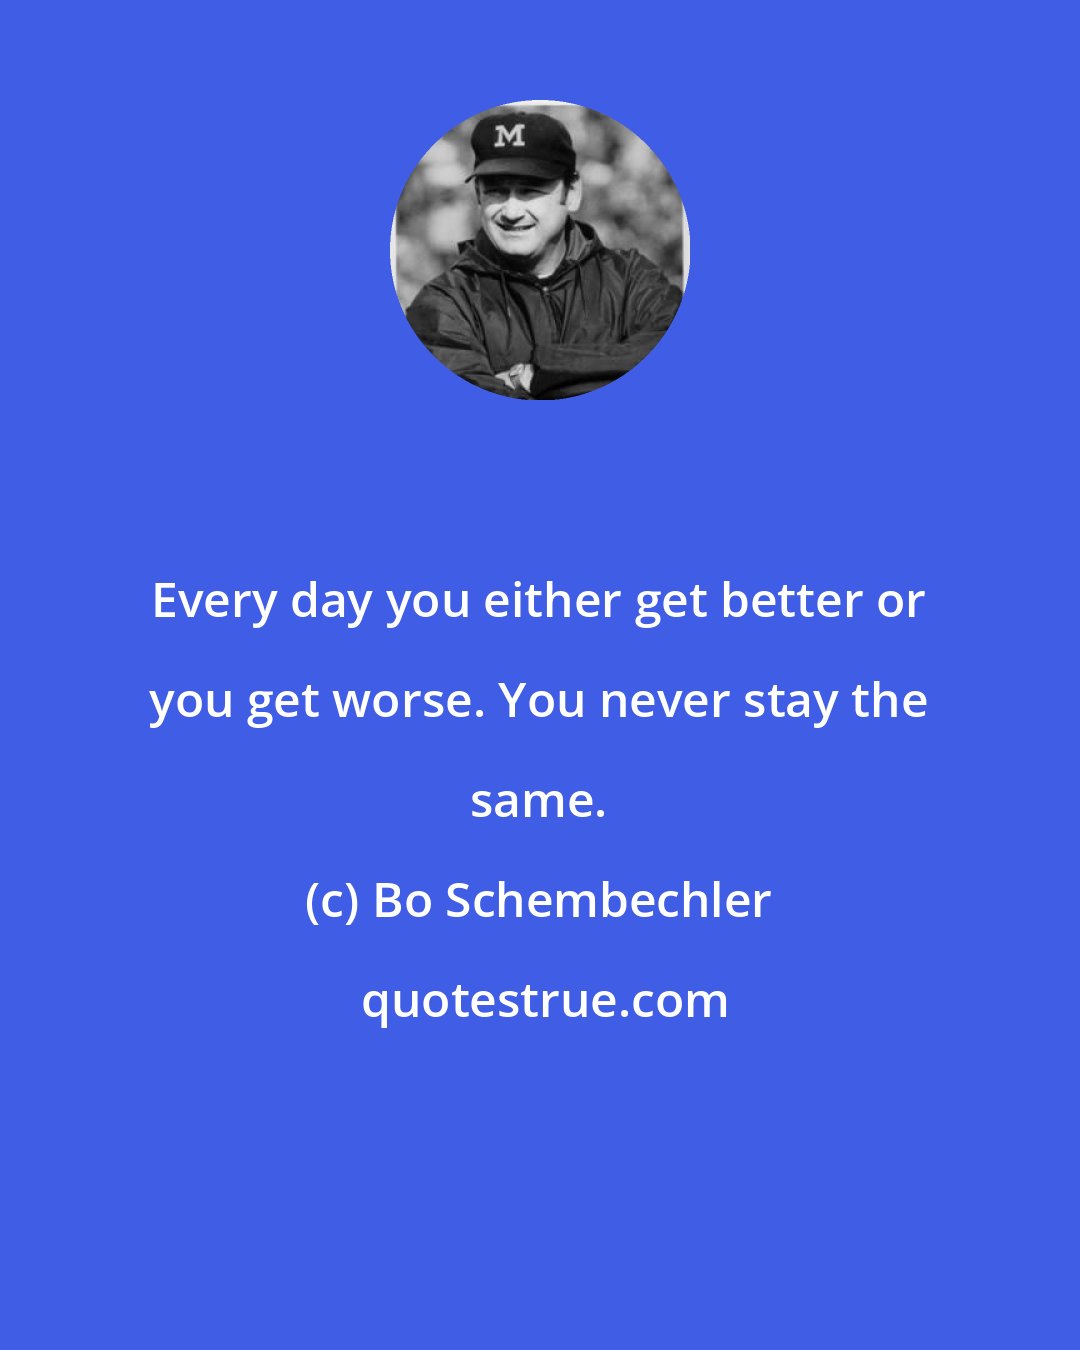 Bo Schembechler: Every day you either get better or you get worse. You never stay the same.